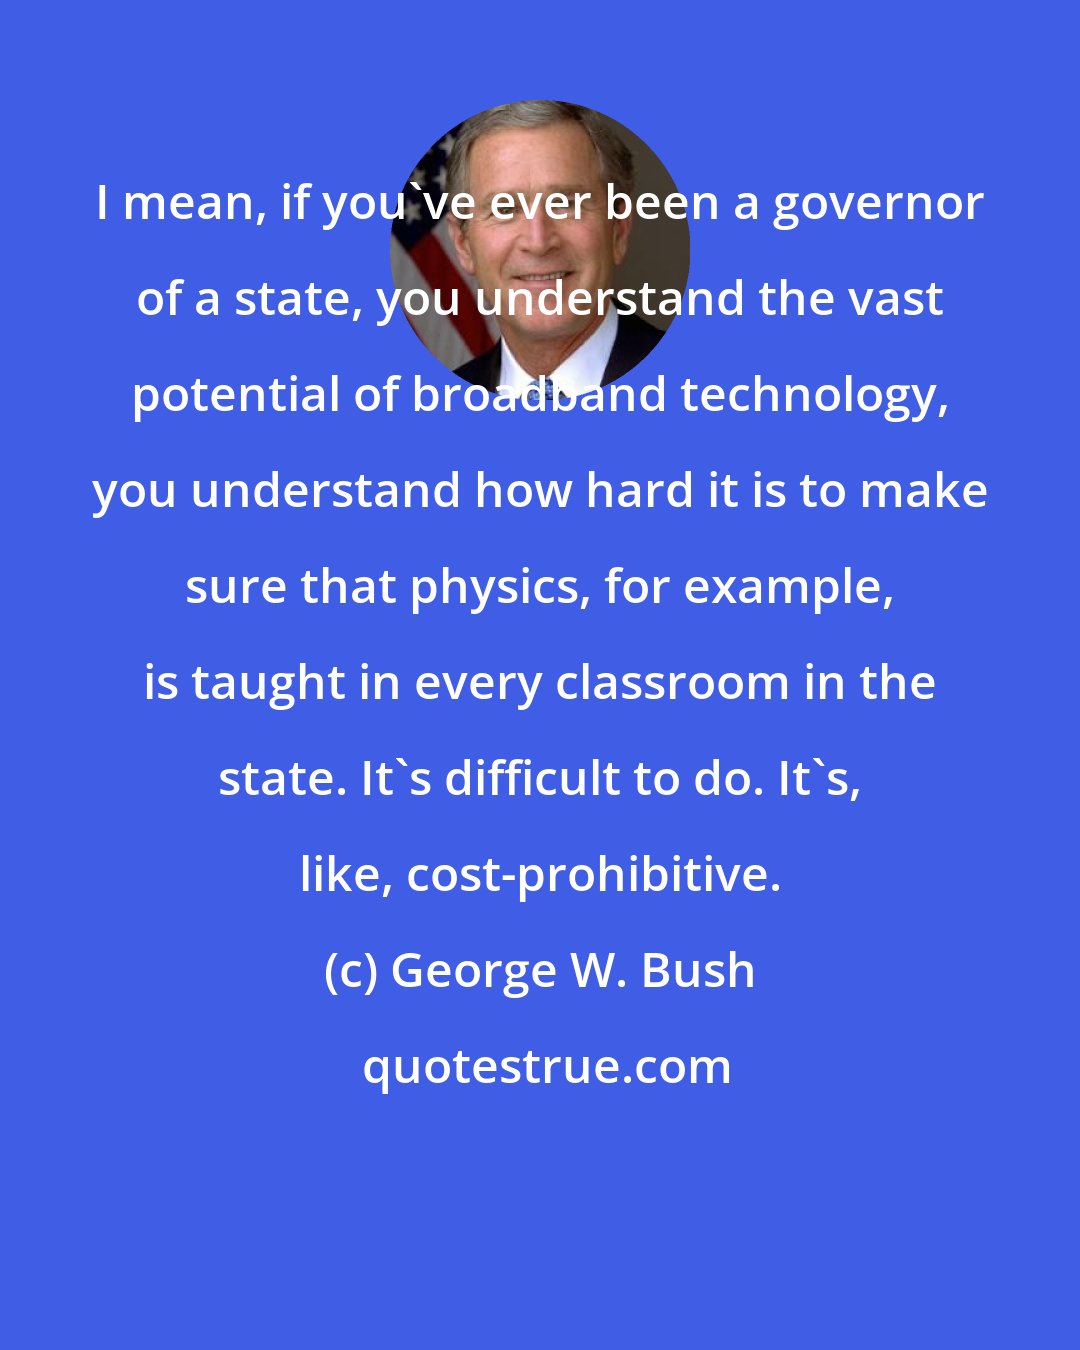 George W. Bush: I mean, if you've ever been a governor of a state, you understand the vast potential of broadband technology, you understand how hard it is to make sure that physics, for example, is taught in every classroom in the state. It's difficult to do. It's, like, cost-prohibitive.